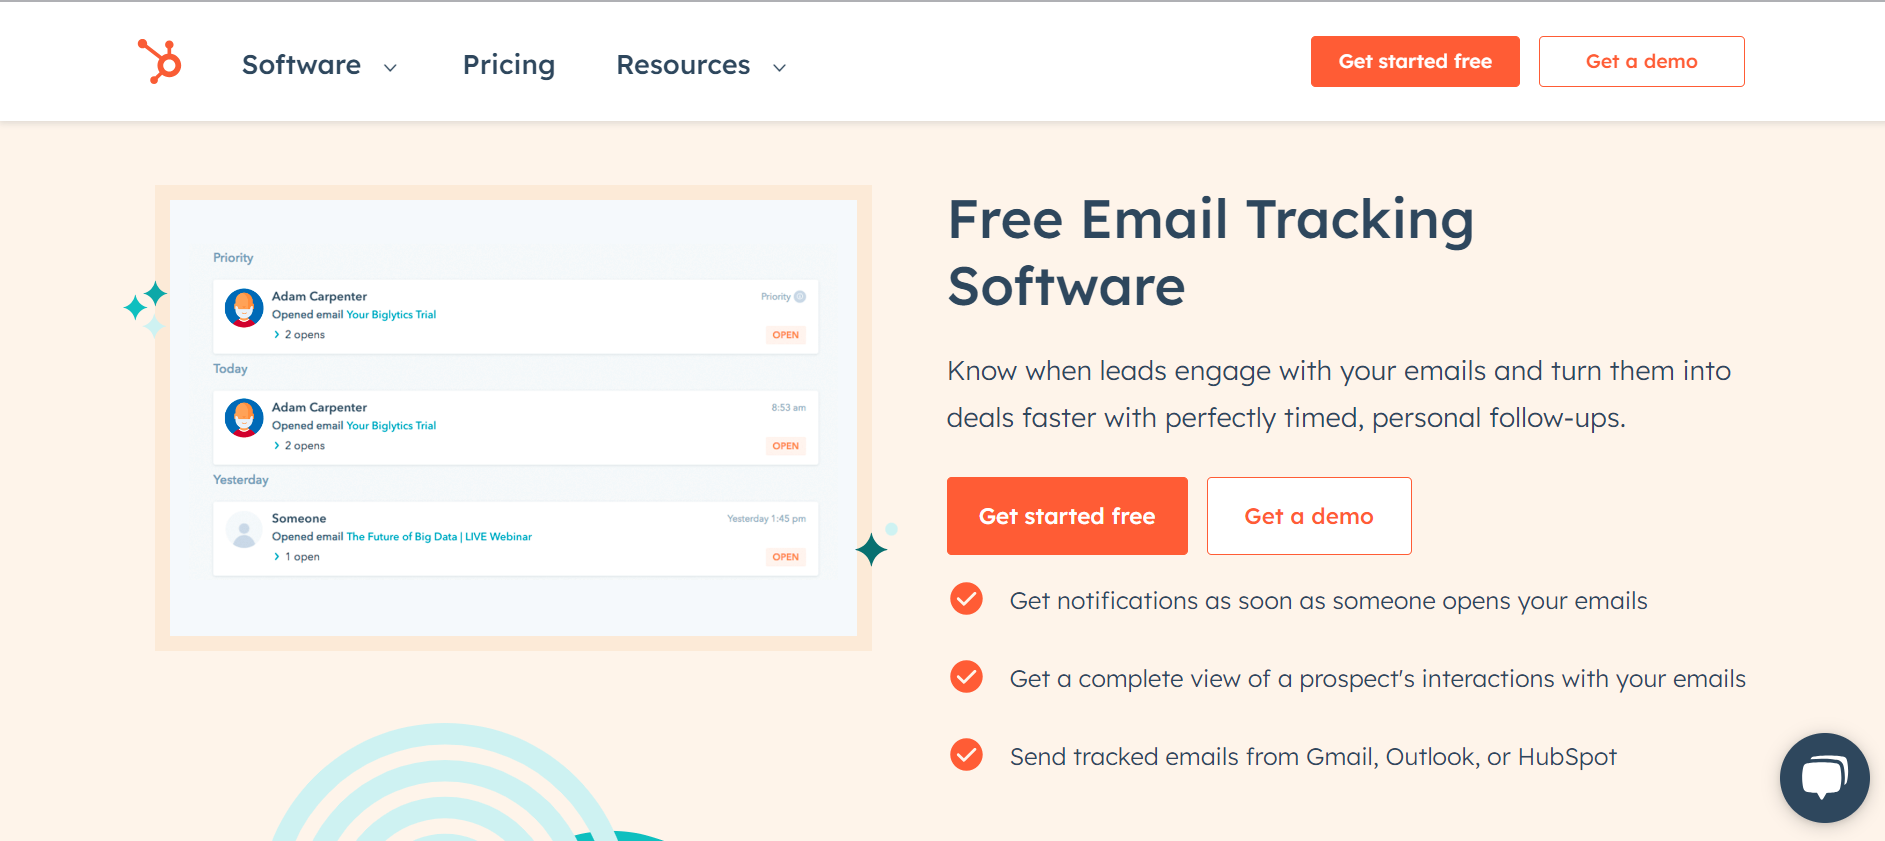 HubSpot Email Tracking Software